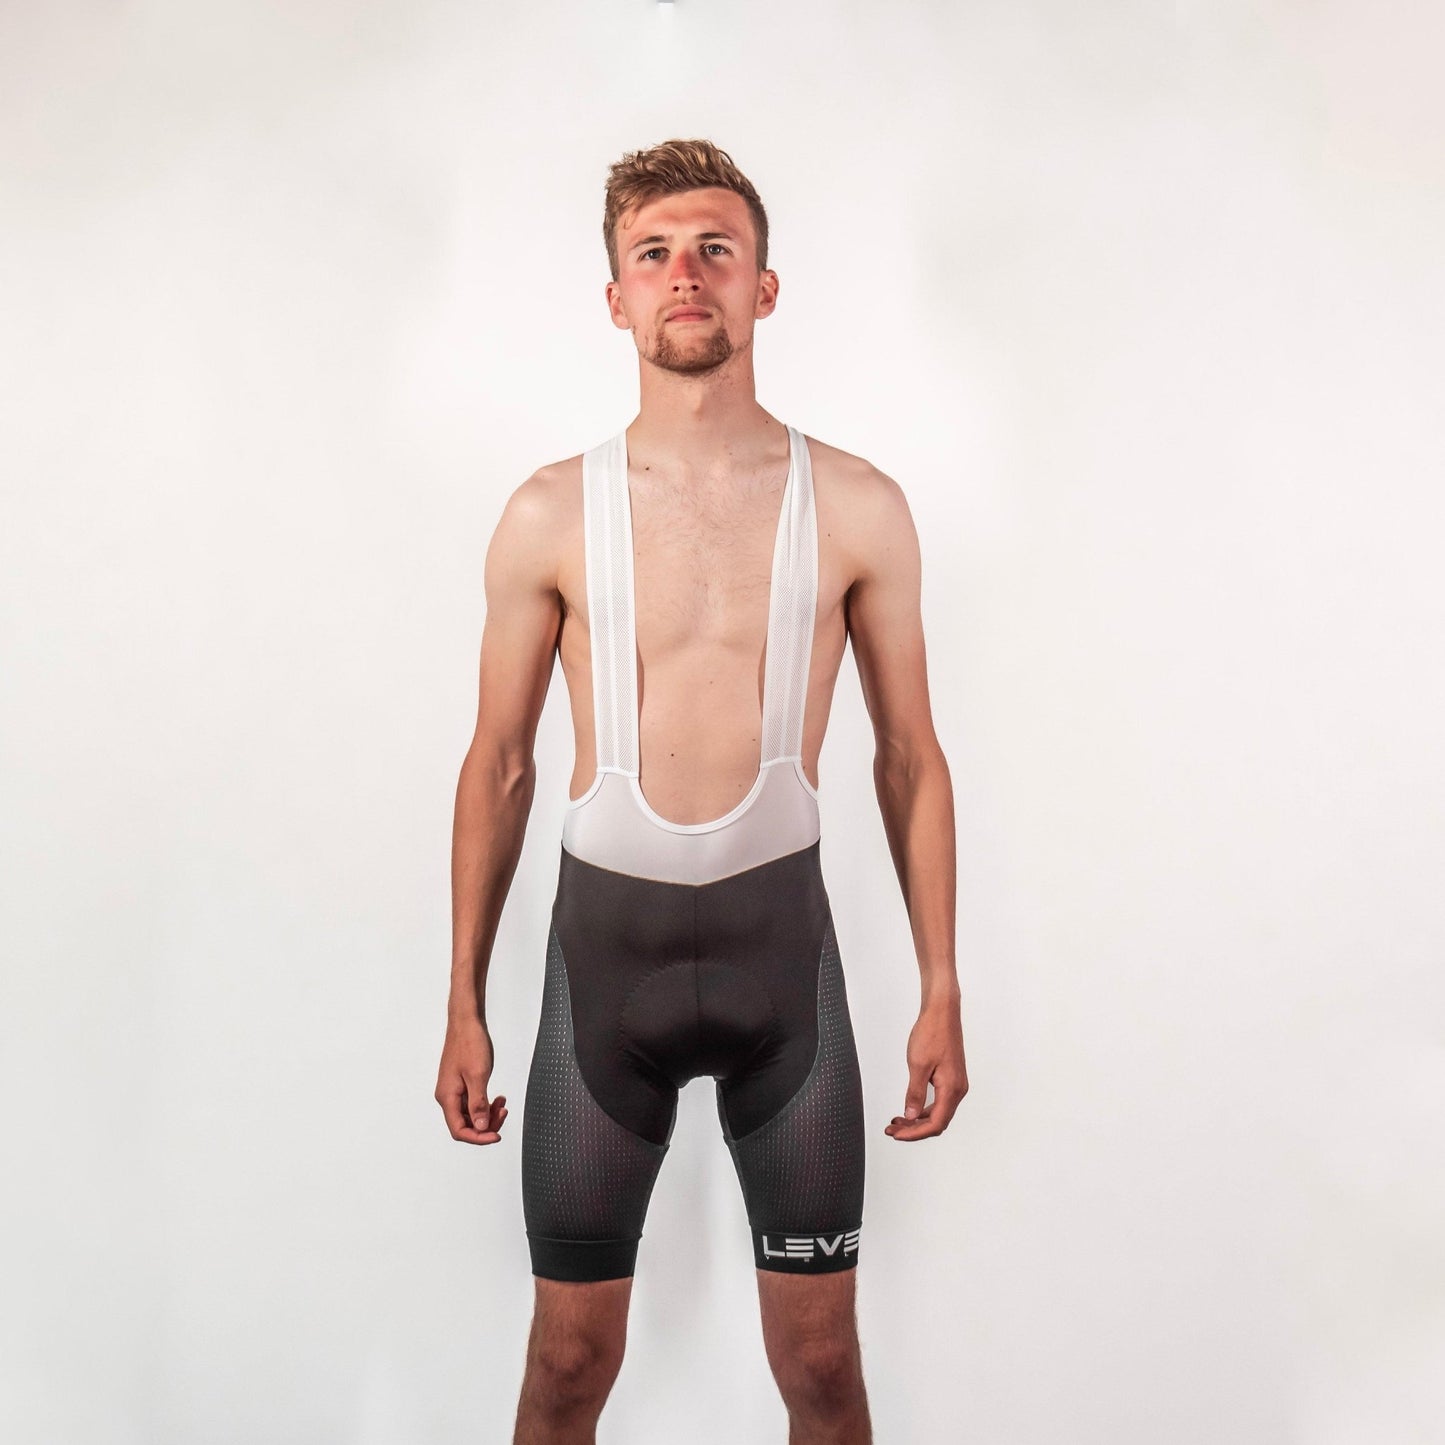 BL13 Indoor Cycling Shorts MENS - LEVEL VELO